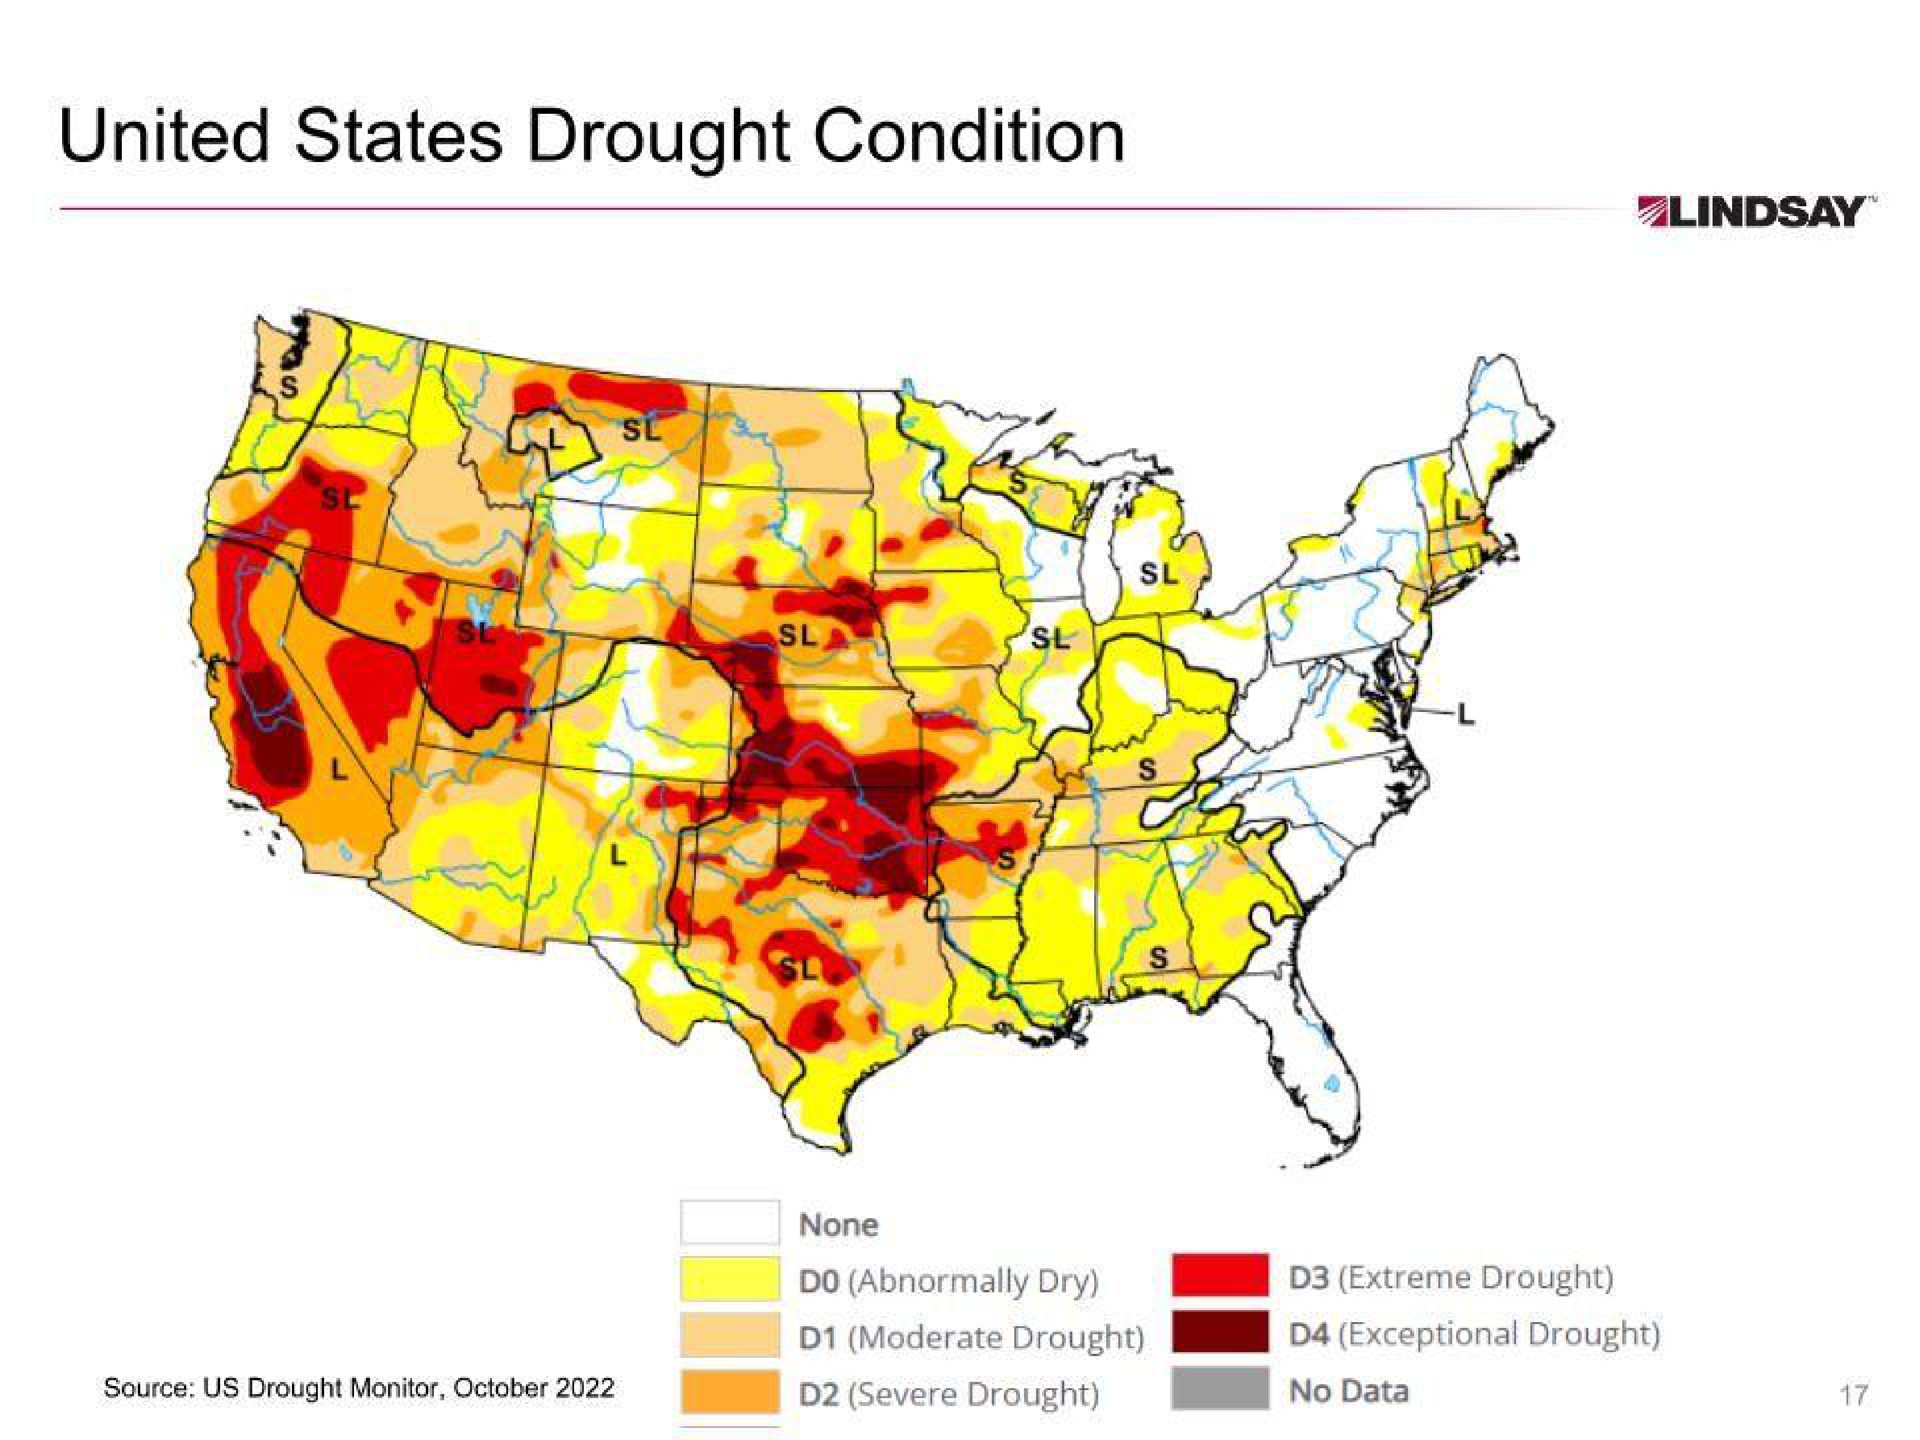 united states drought condition | Lindsay Corporation